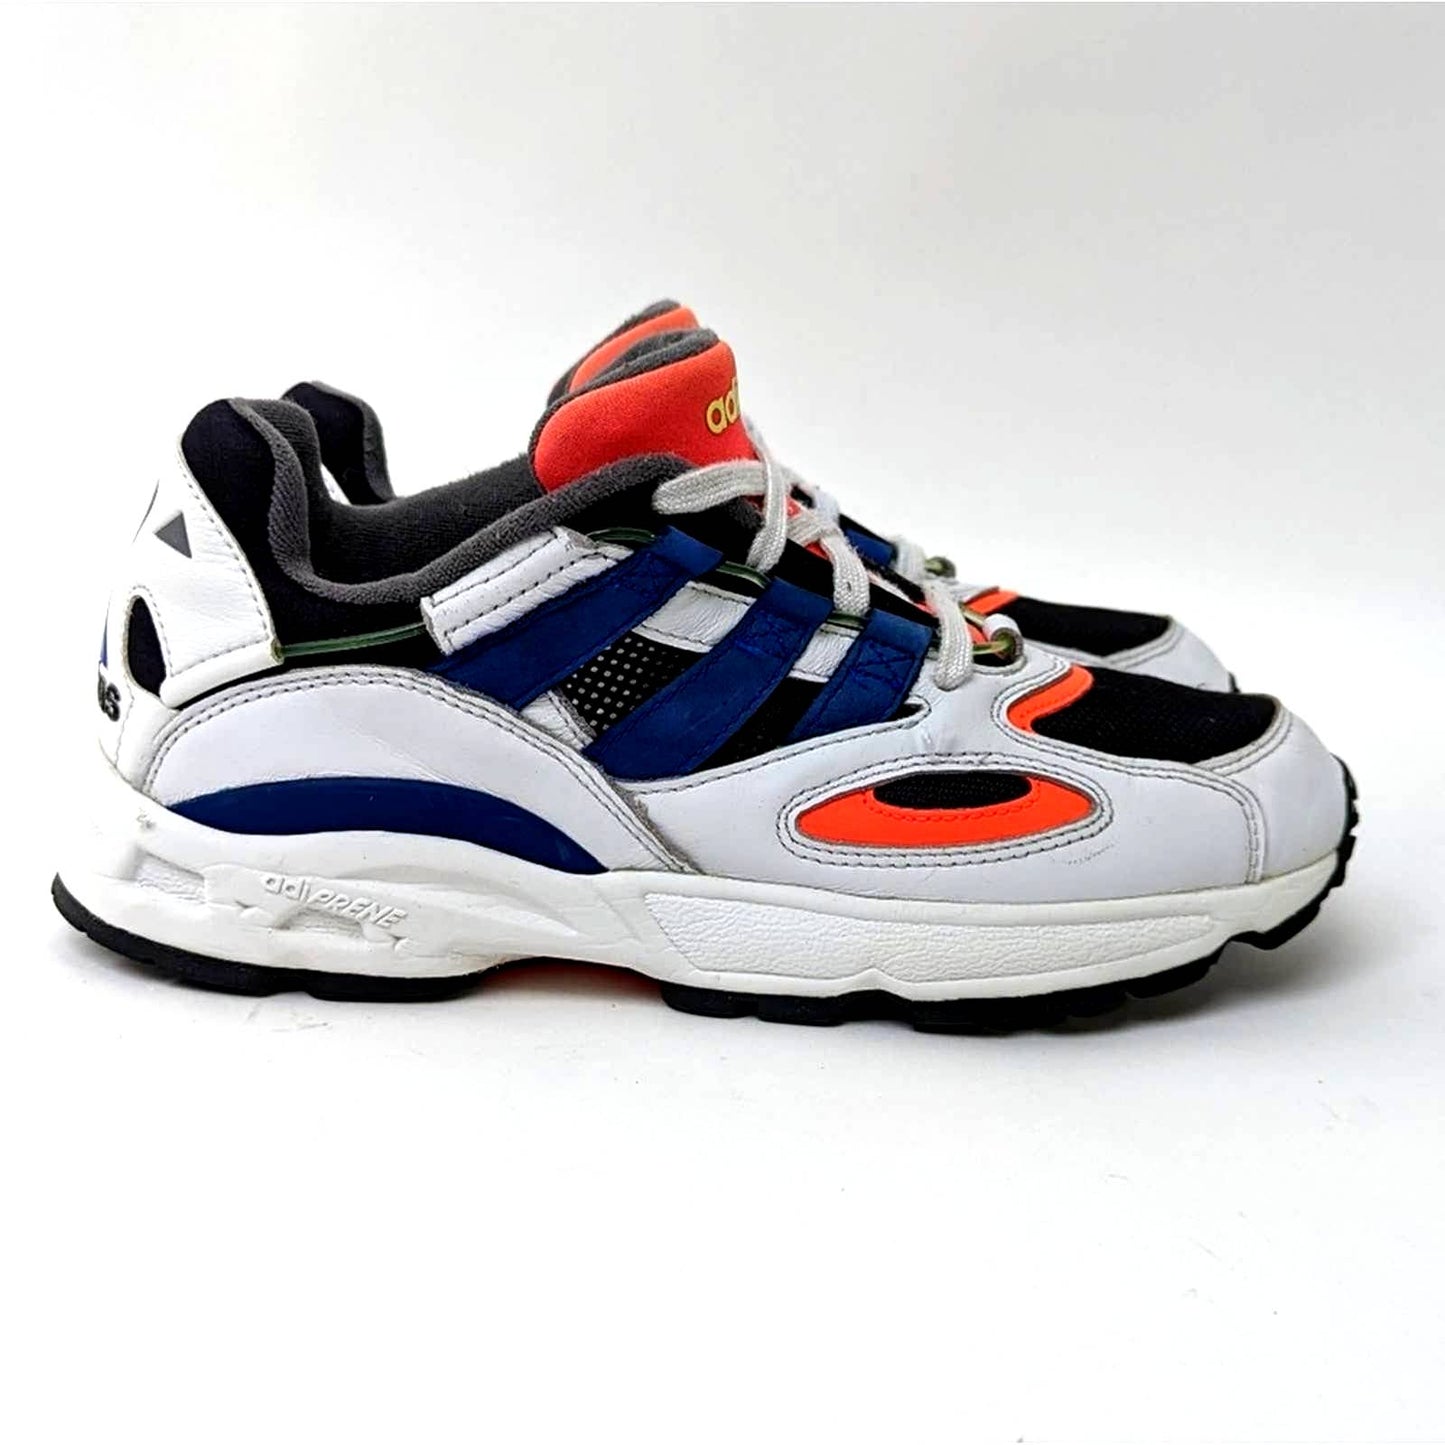 adidas Lxcon 94 Vintage Inspired Tennis Shoes - 8